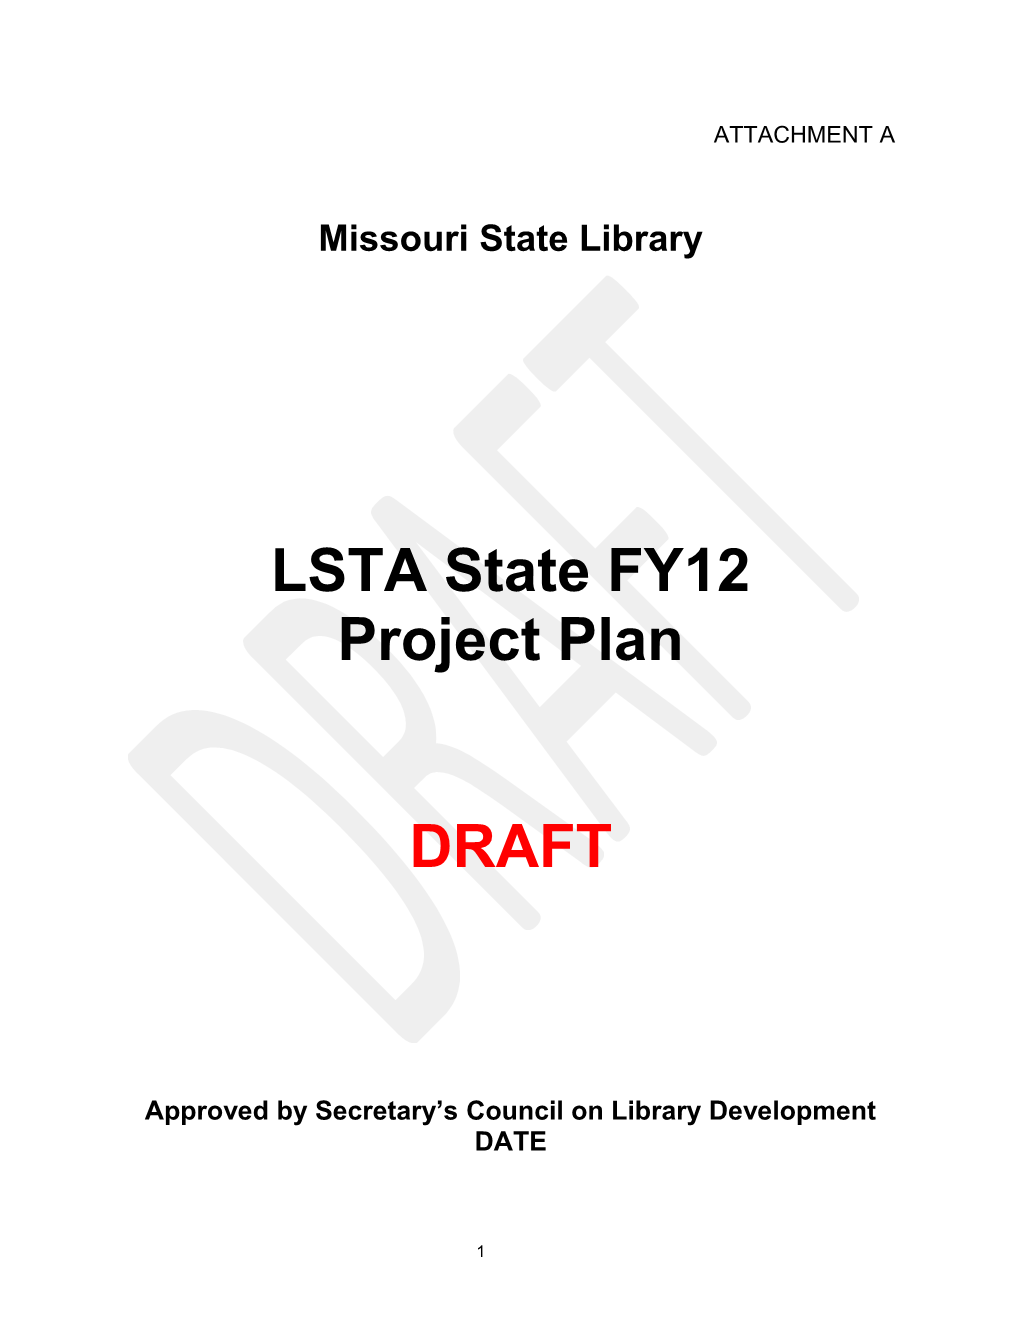 Approved by Secretary S Council on Library Development